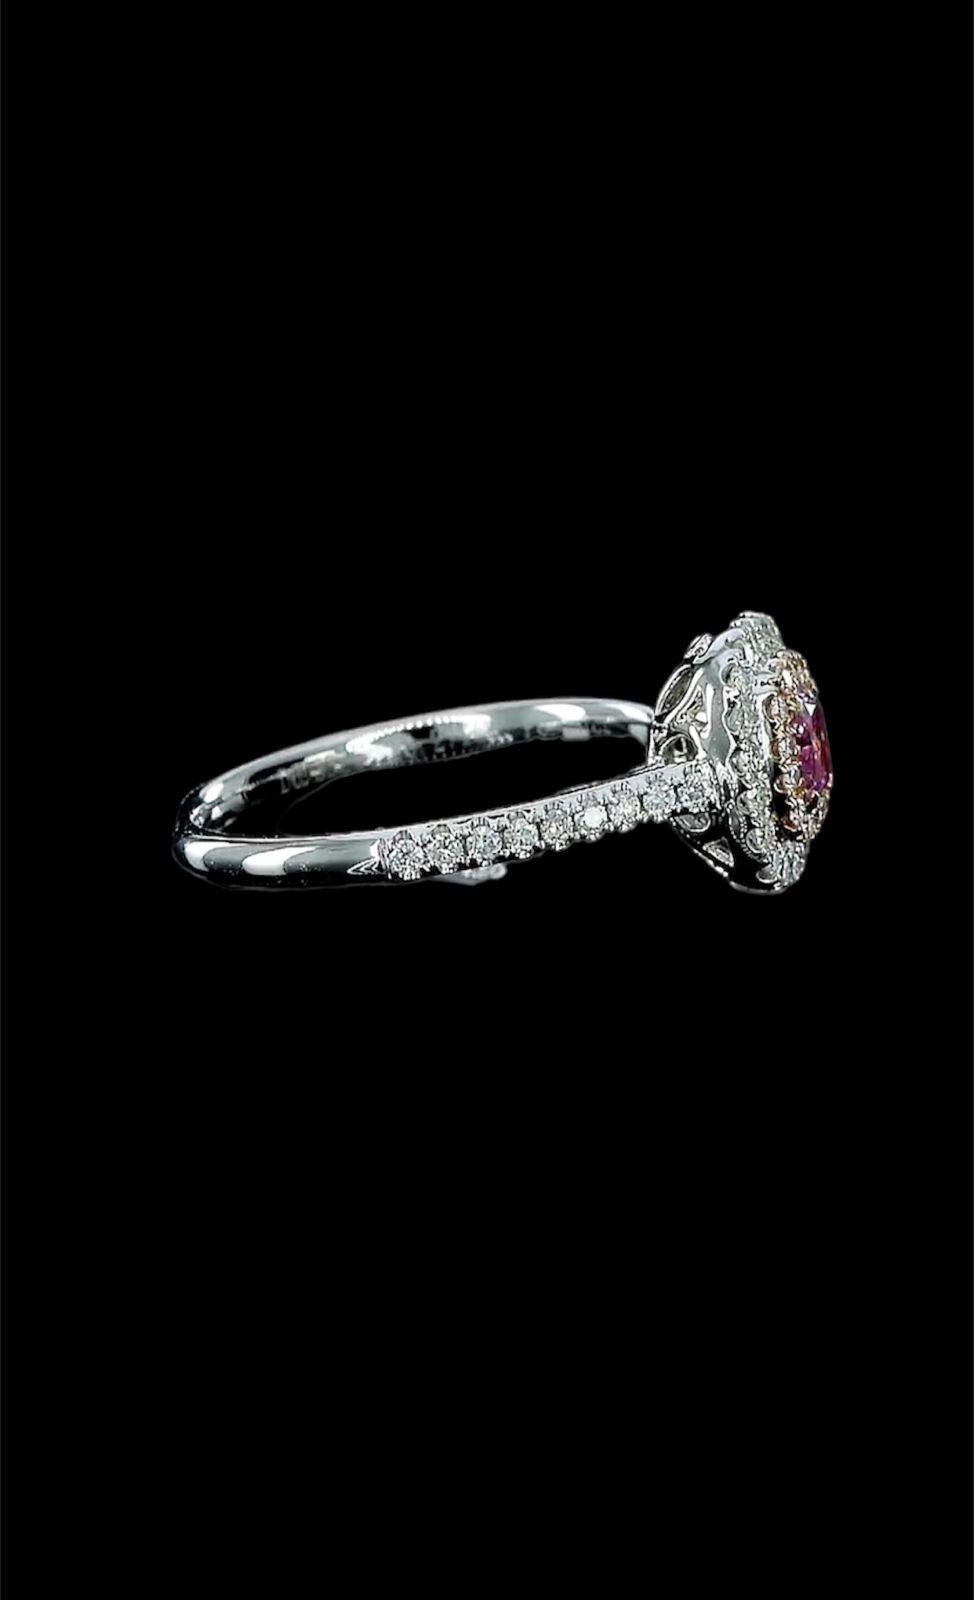 GIA Certified 0.33 Carat Faint Pink Diamond Ring SI2 Clarity For Sale 3